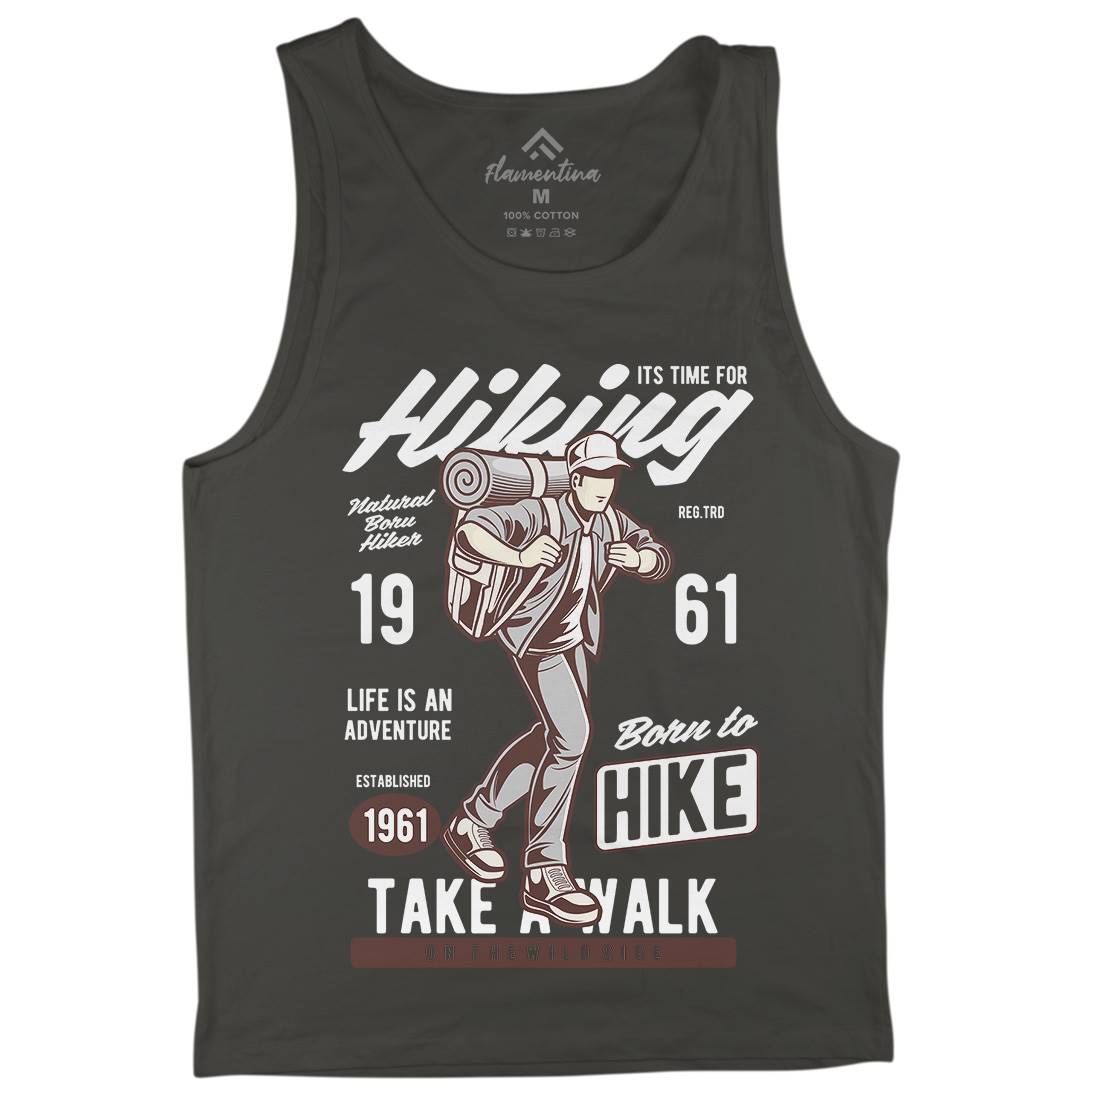 Its Time For Hiking Mens Tank Top Vest Nature C382